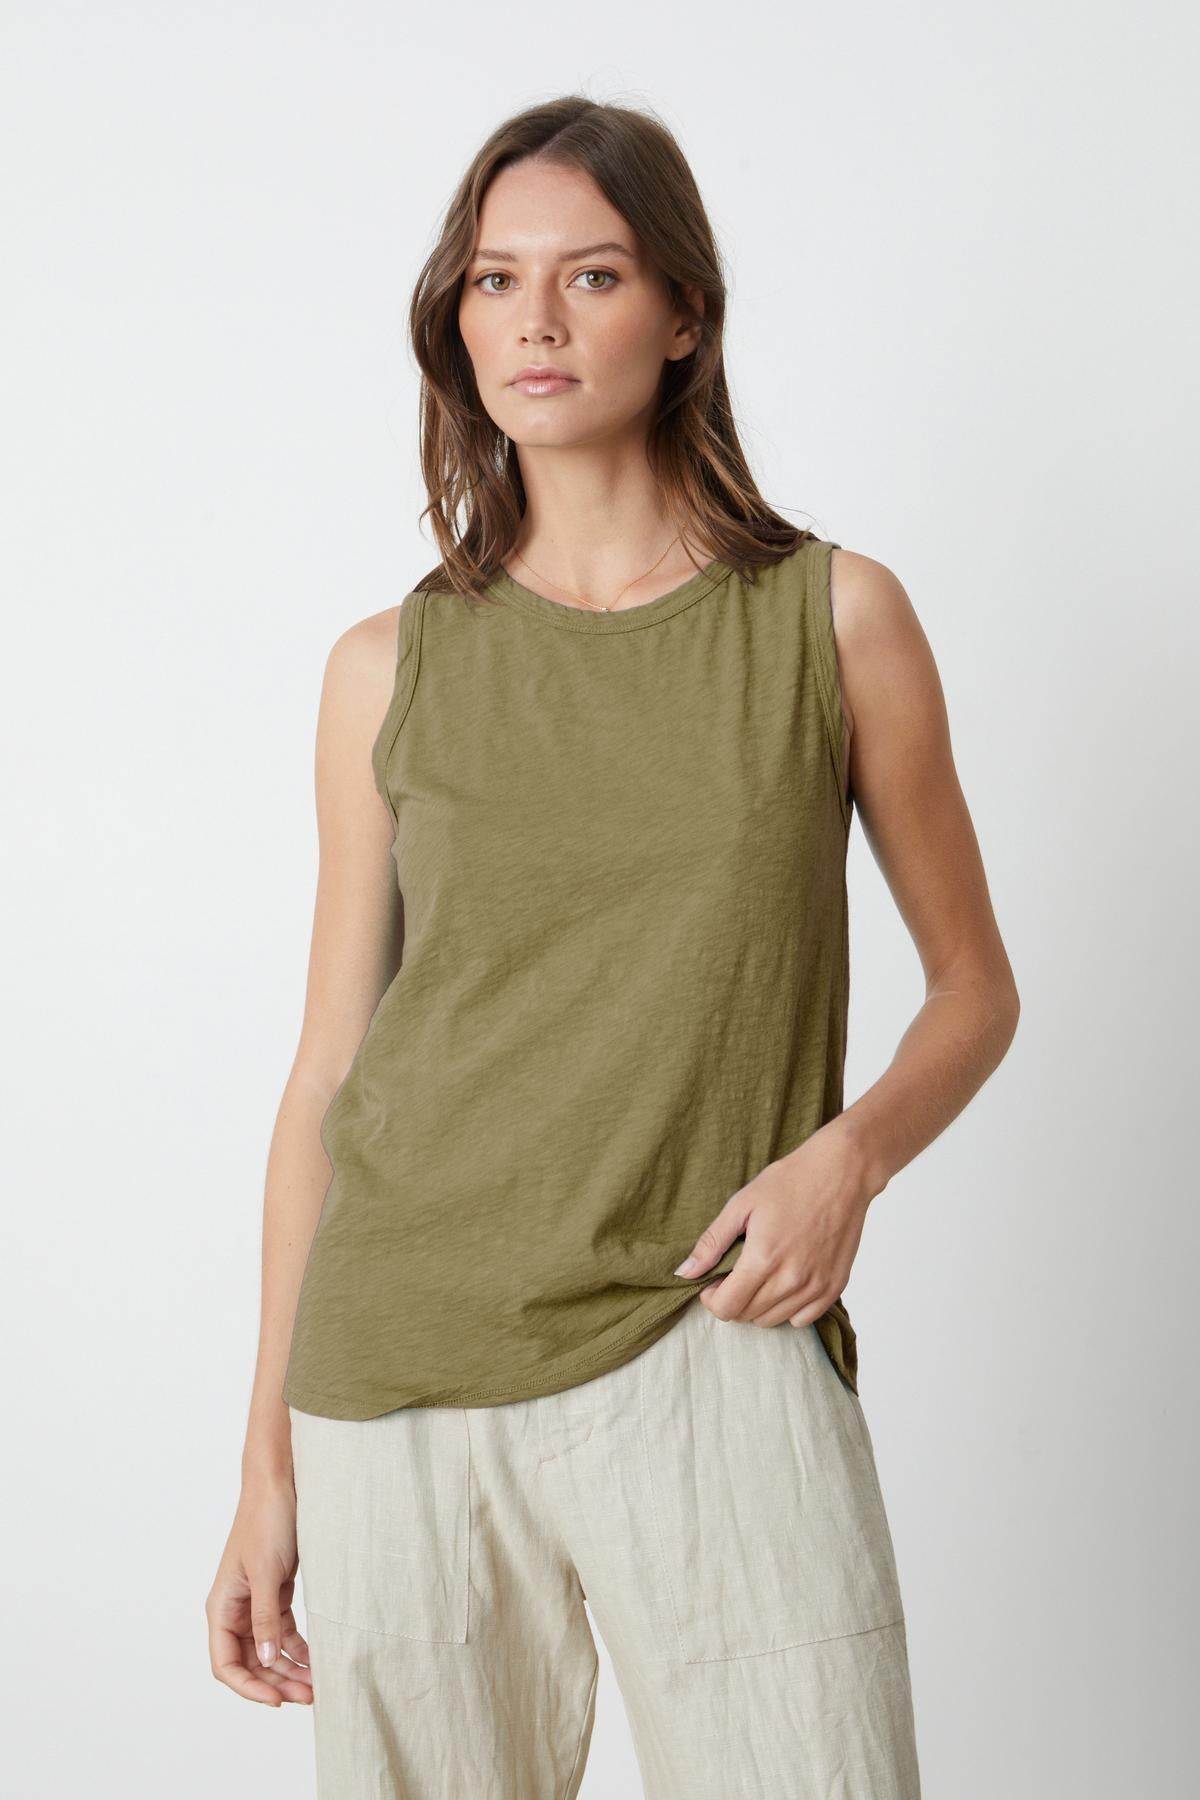   The TAURUS COTTON SLUB TANK in olive green is perfect for the tomboy-inspired look. Made of cotton slub fabric by Velvet by Graham & Spencer. 